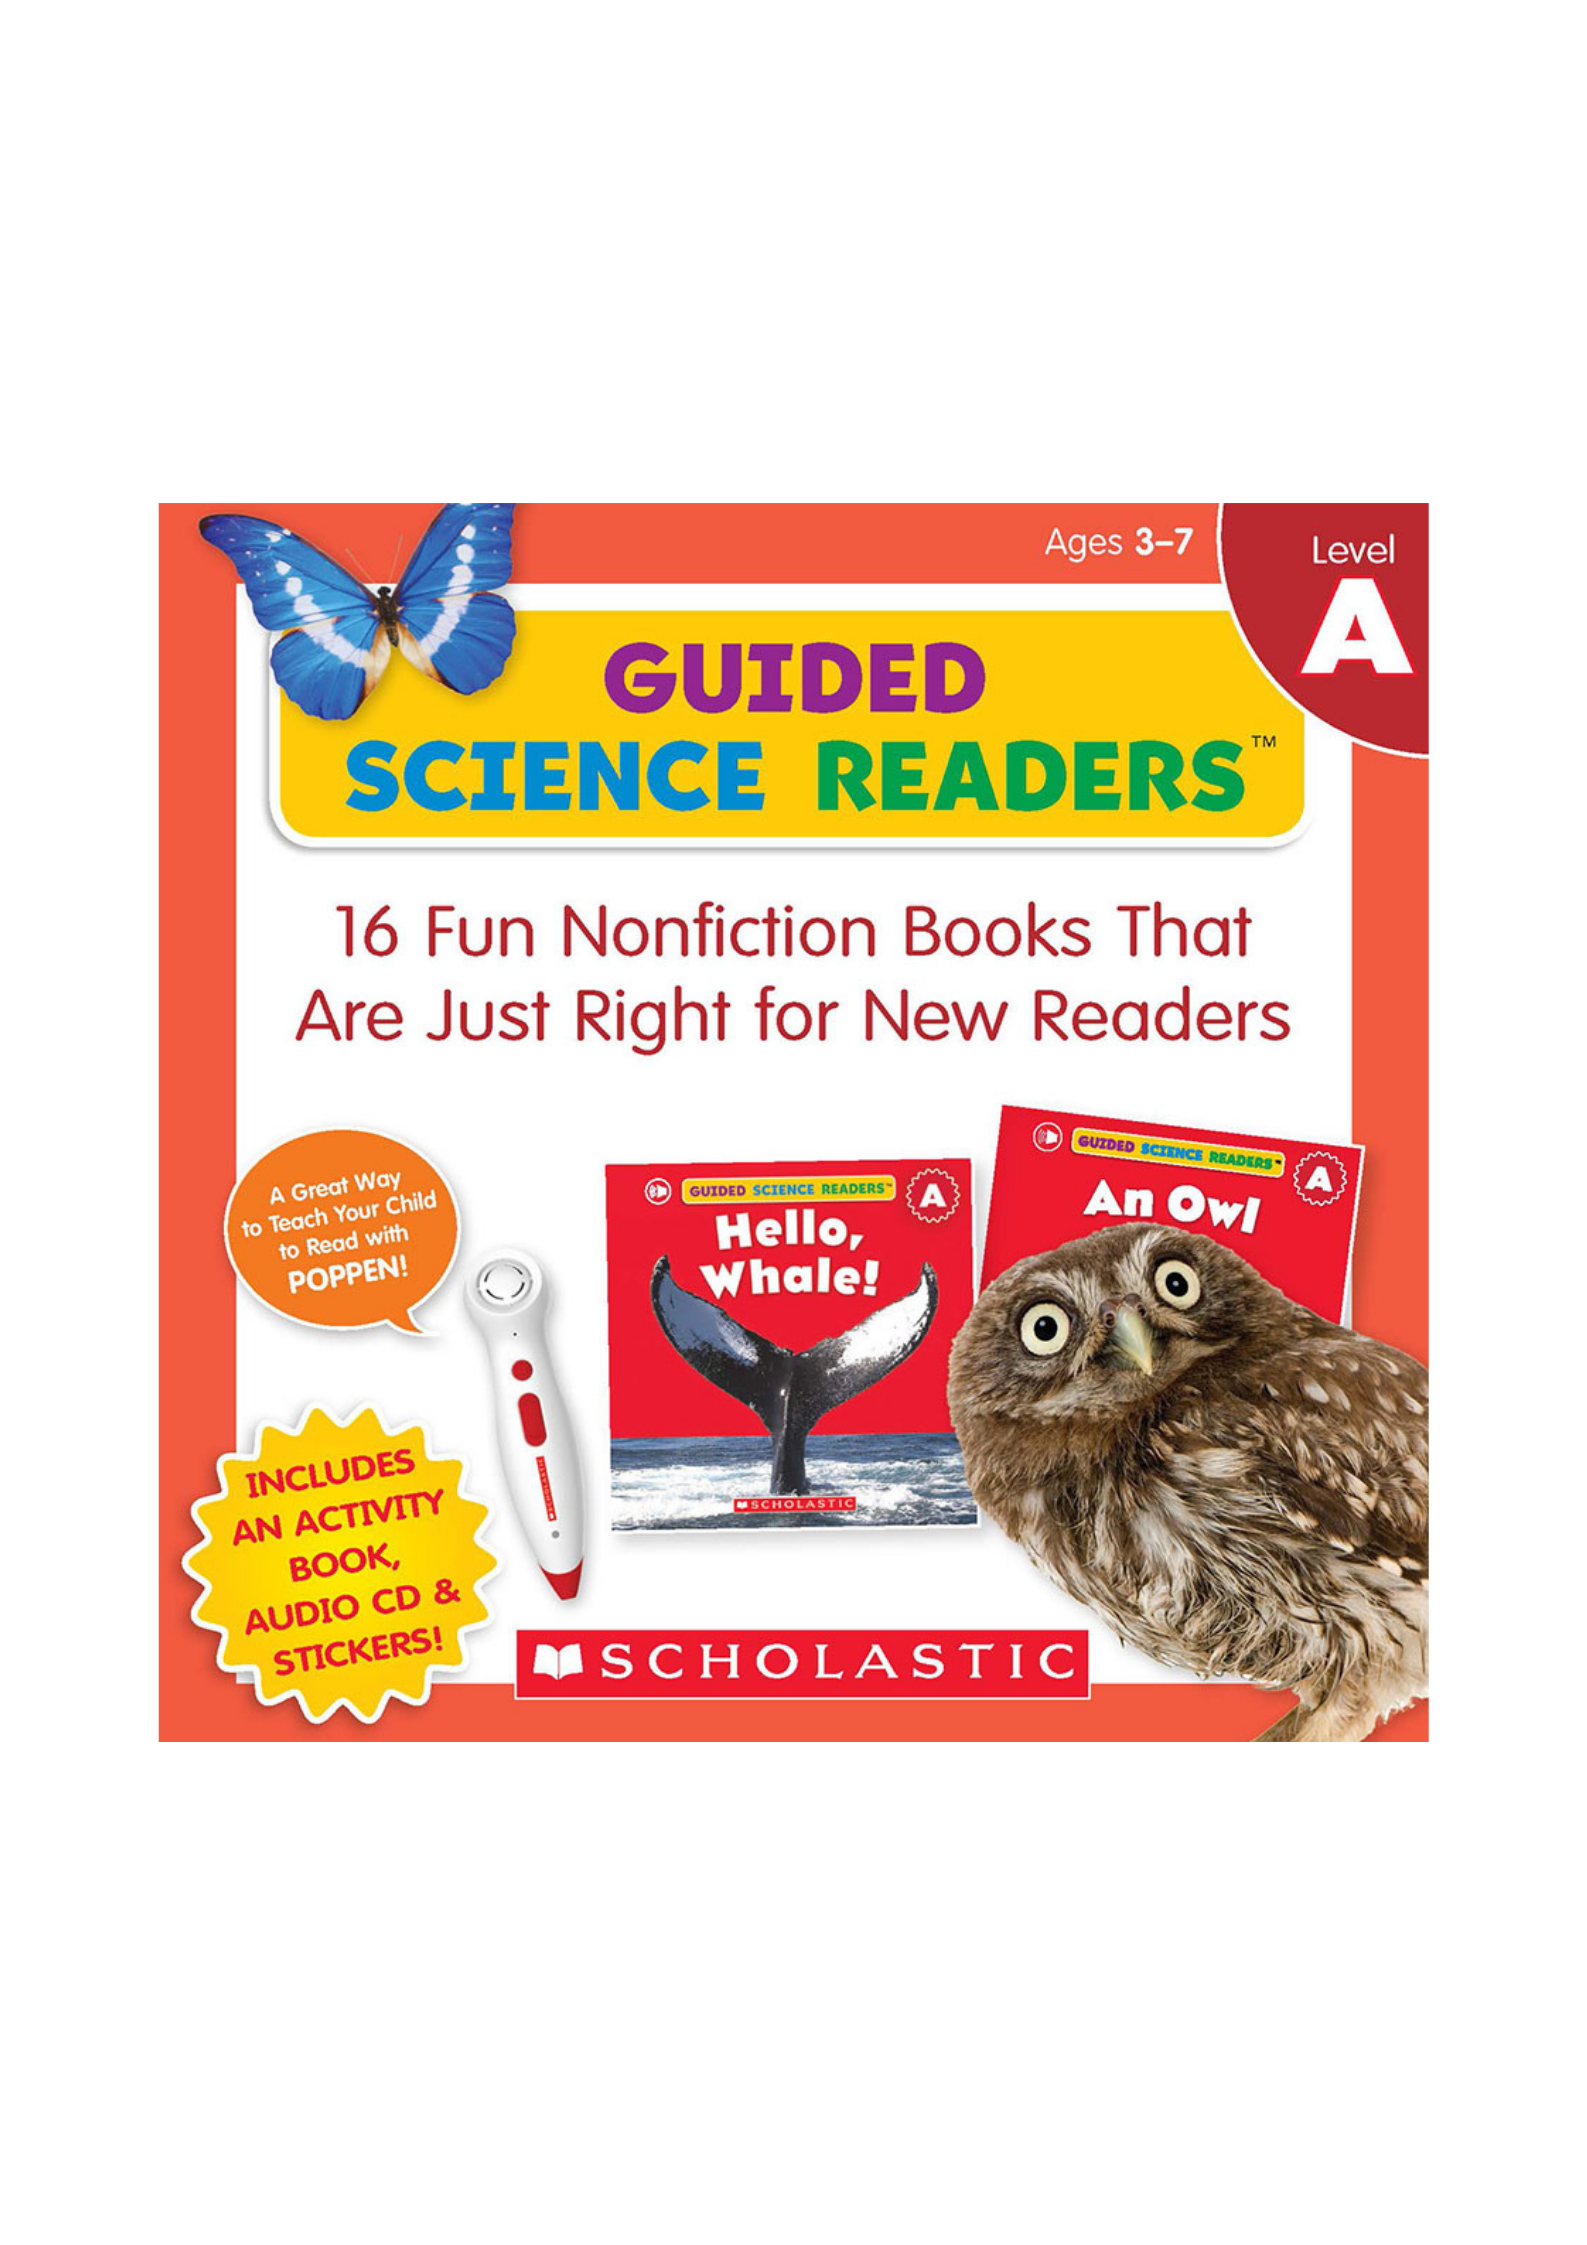 Guided Science Readers Level A